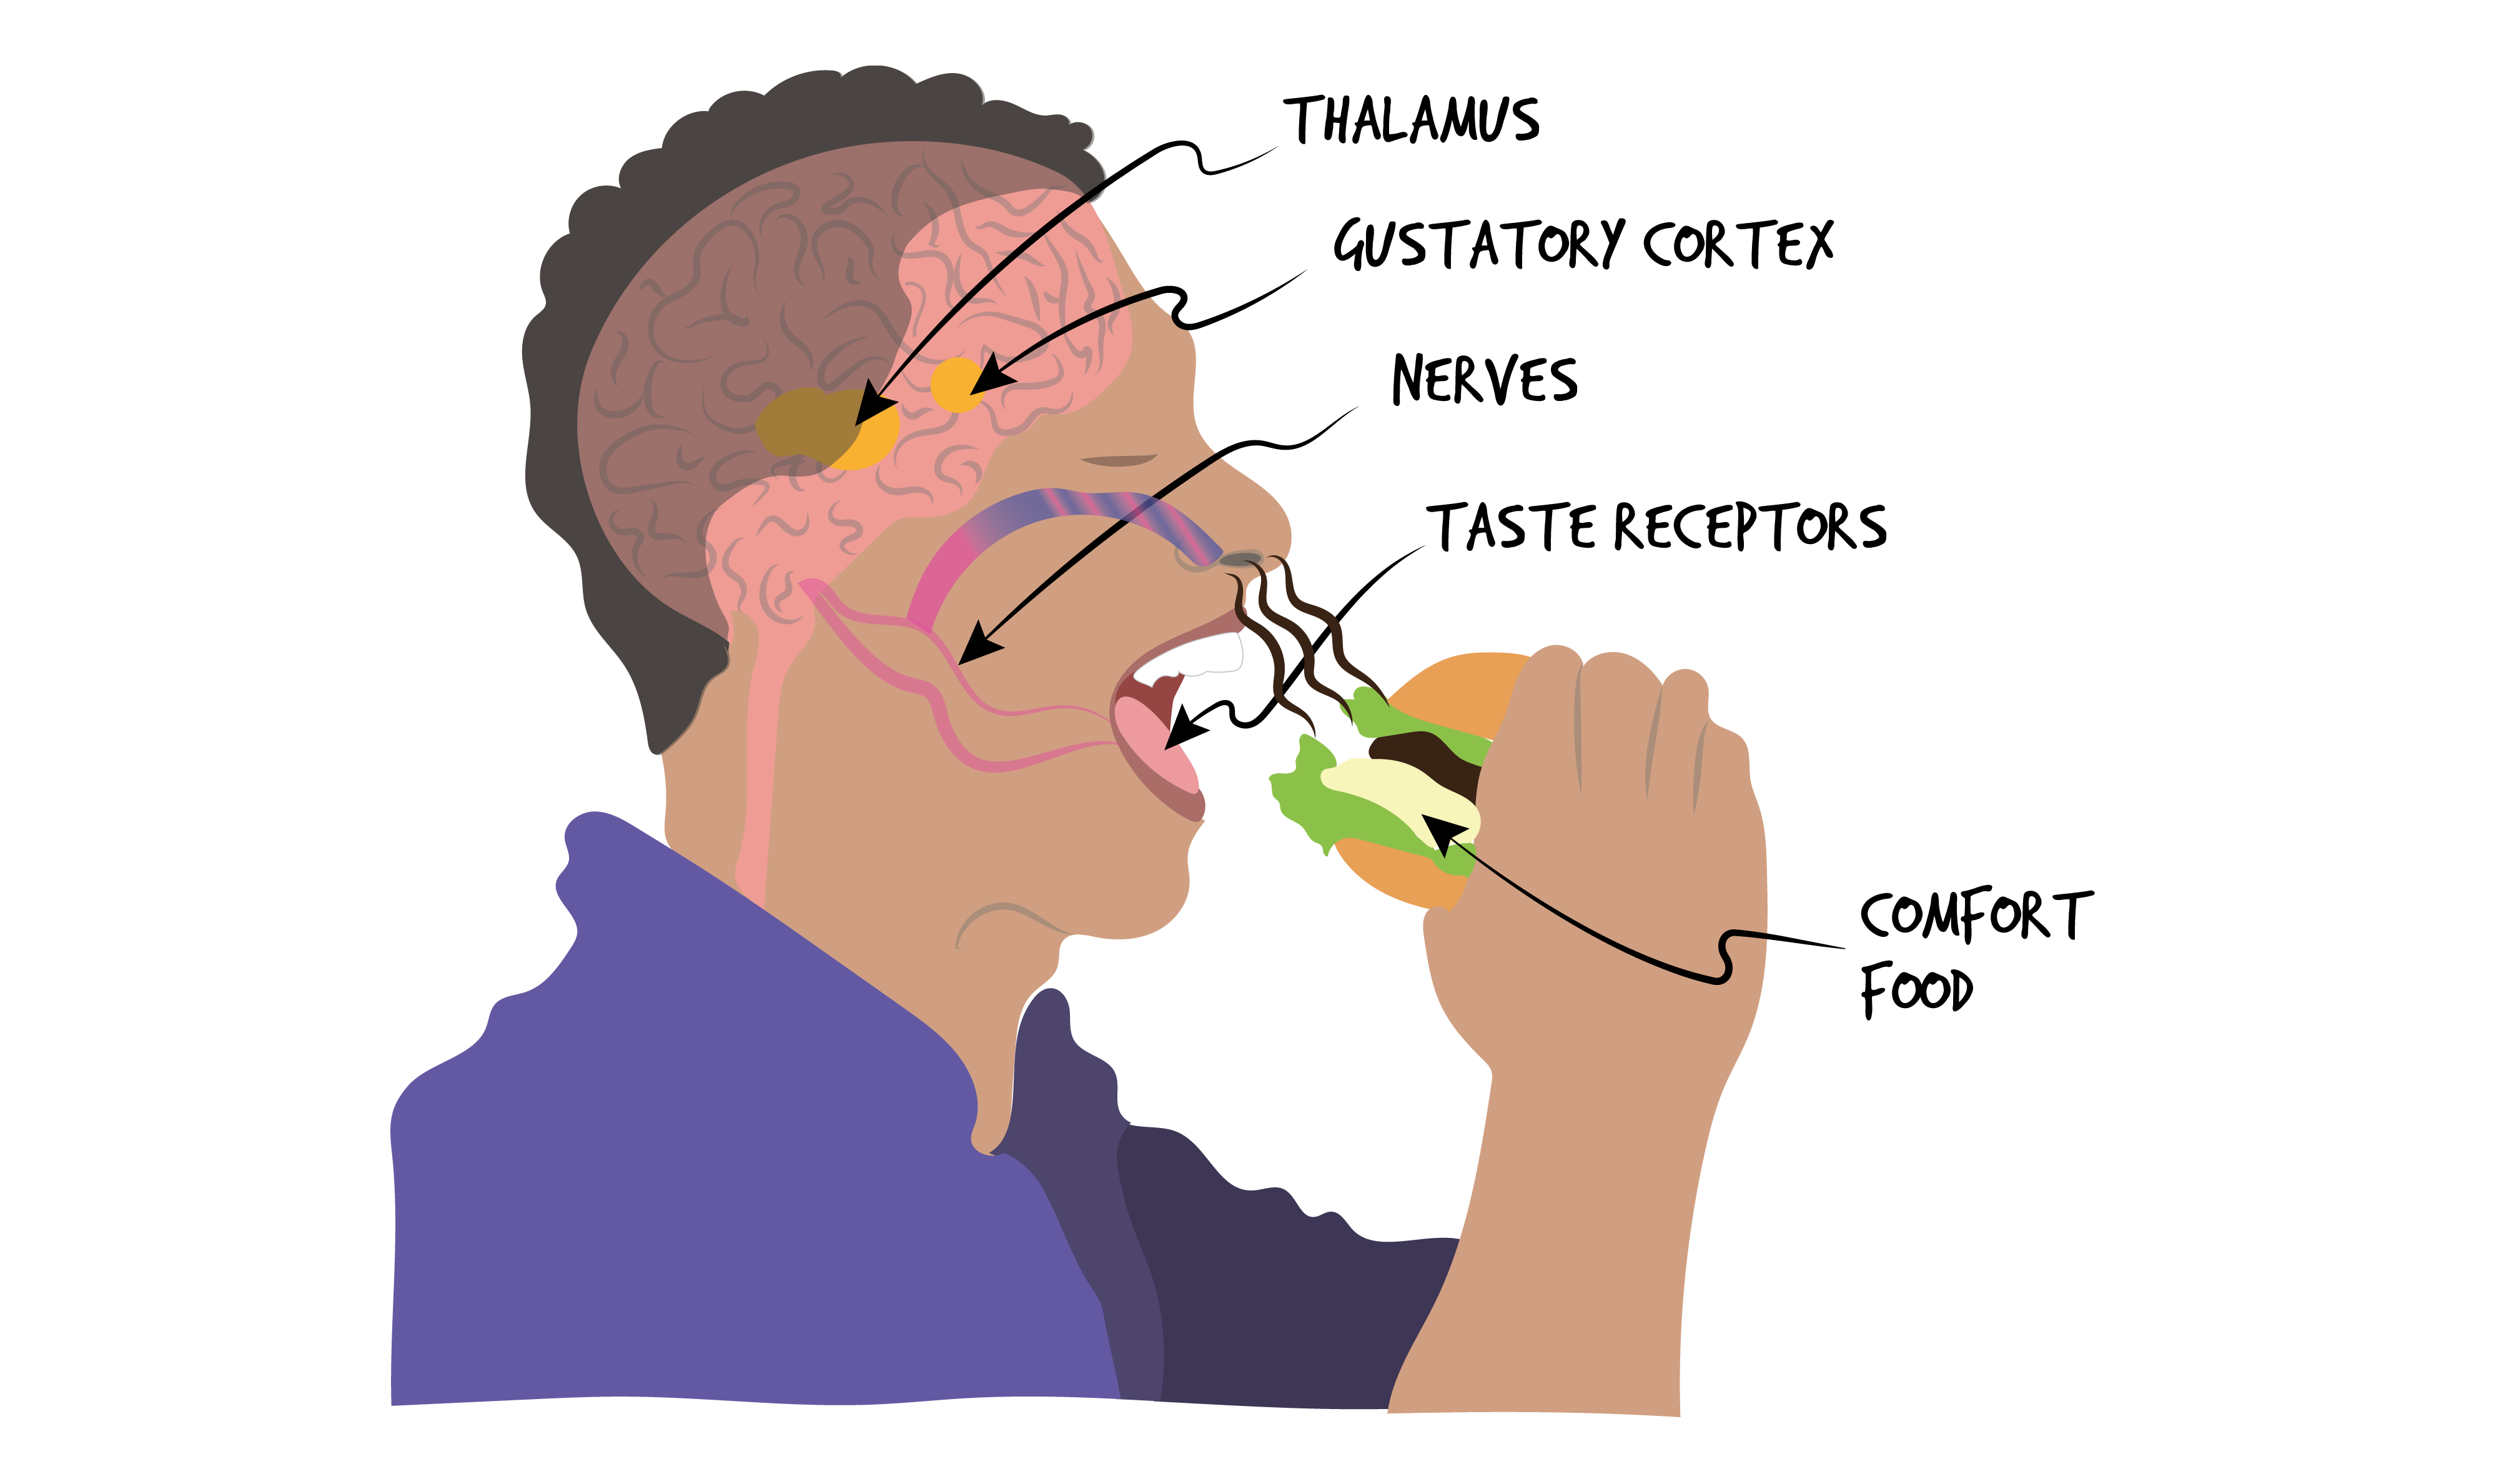 A side view of a person in a purple shirt eating a burger. X-ray view of certain body parts contributing to the experience: brain is seen with arrows pointing to text Thalamus and Gustory Cortex. Next, nerves are seen with an arrow pointing to the text Nerves. Next, an arrow points to a tongue with text Taste Receptors. Next, an arrow points to the food with text Comfort Food.